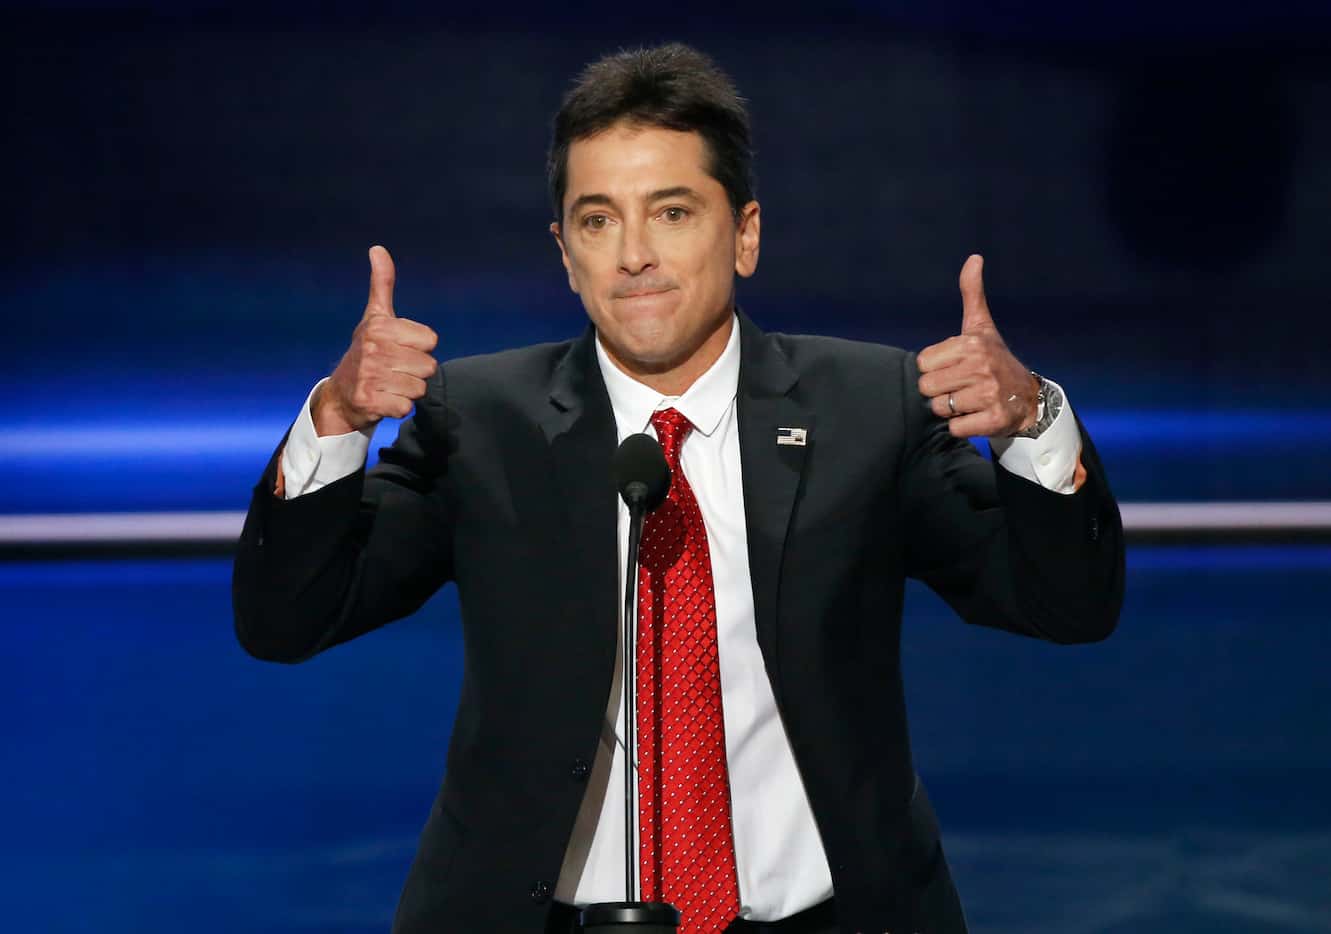 Actor Scott Baio gives a thumbs-up after promoting Donald Trump in a speech  during the...